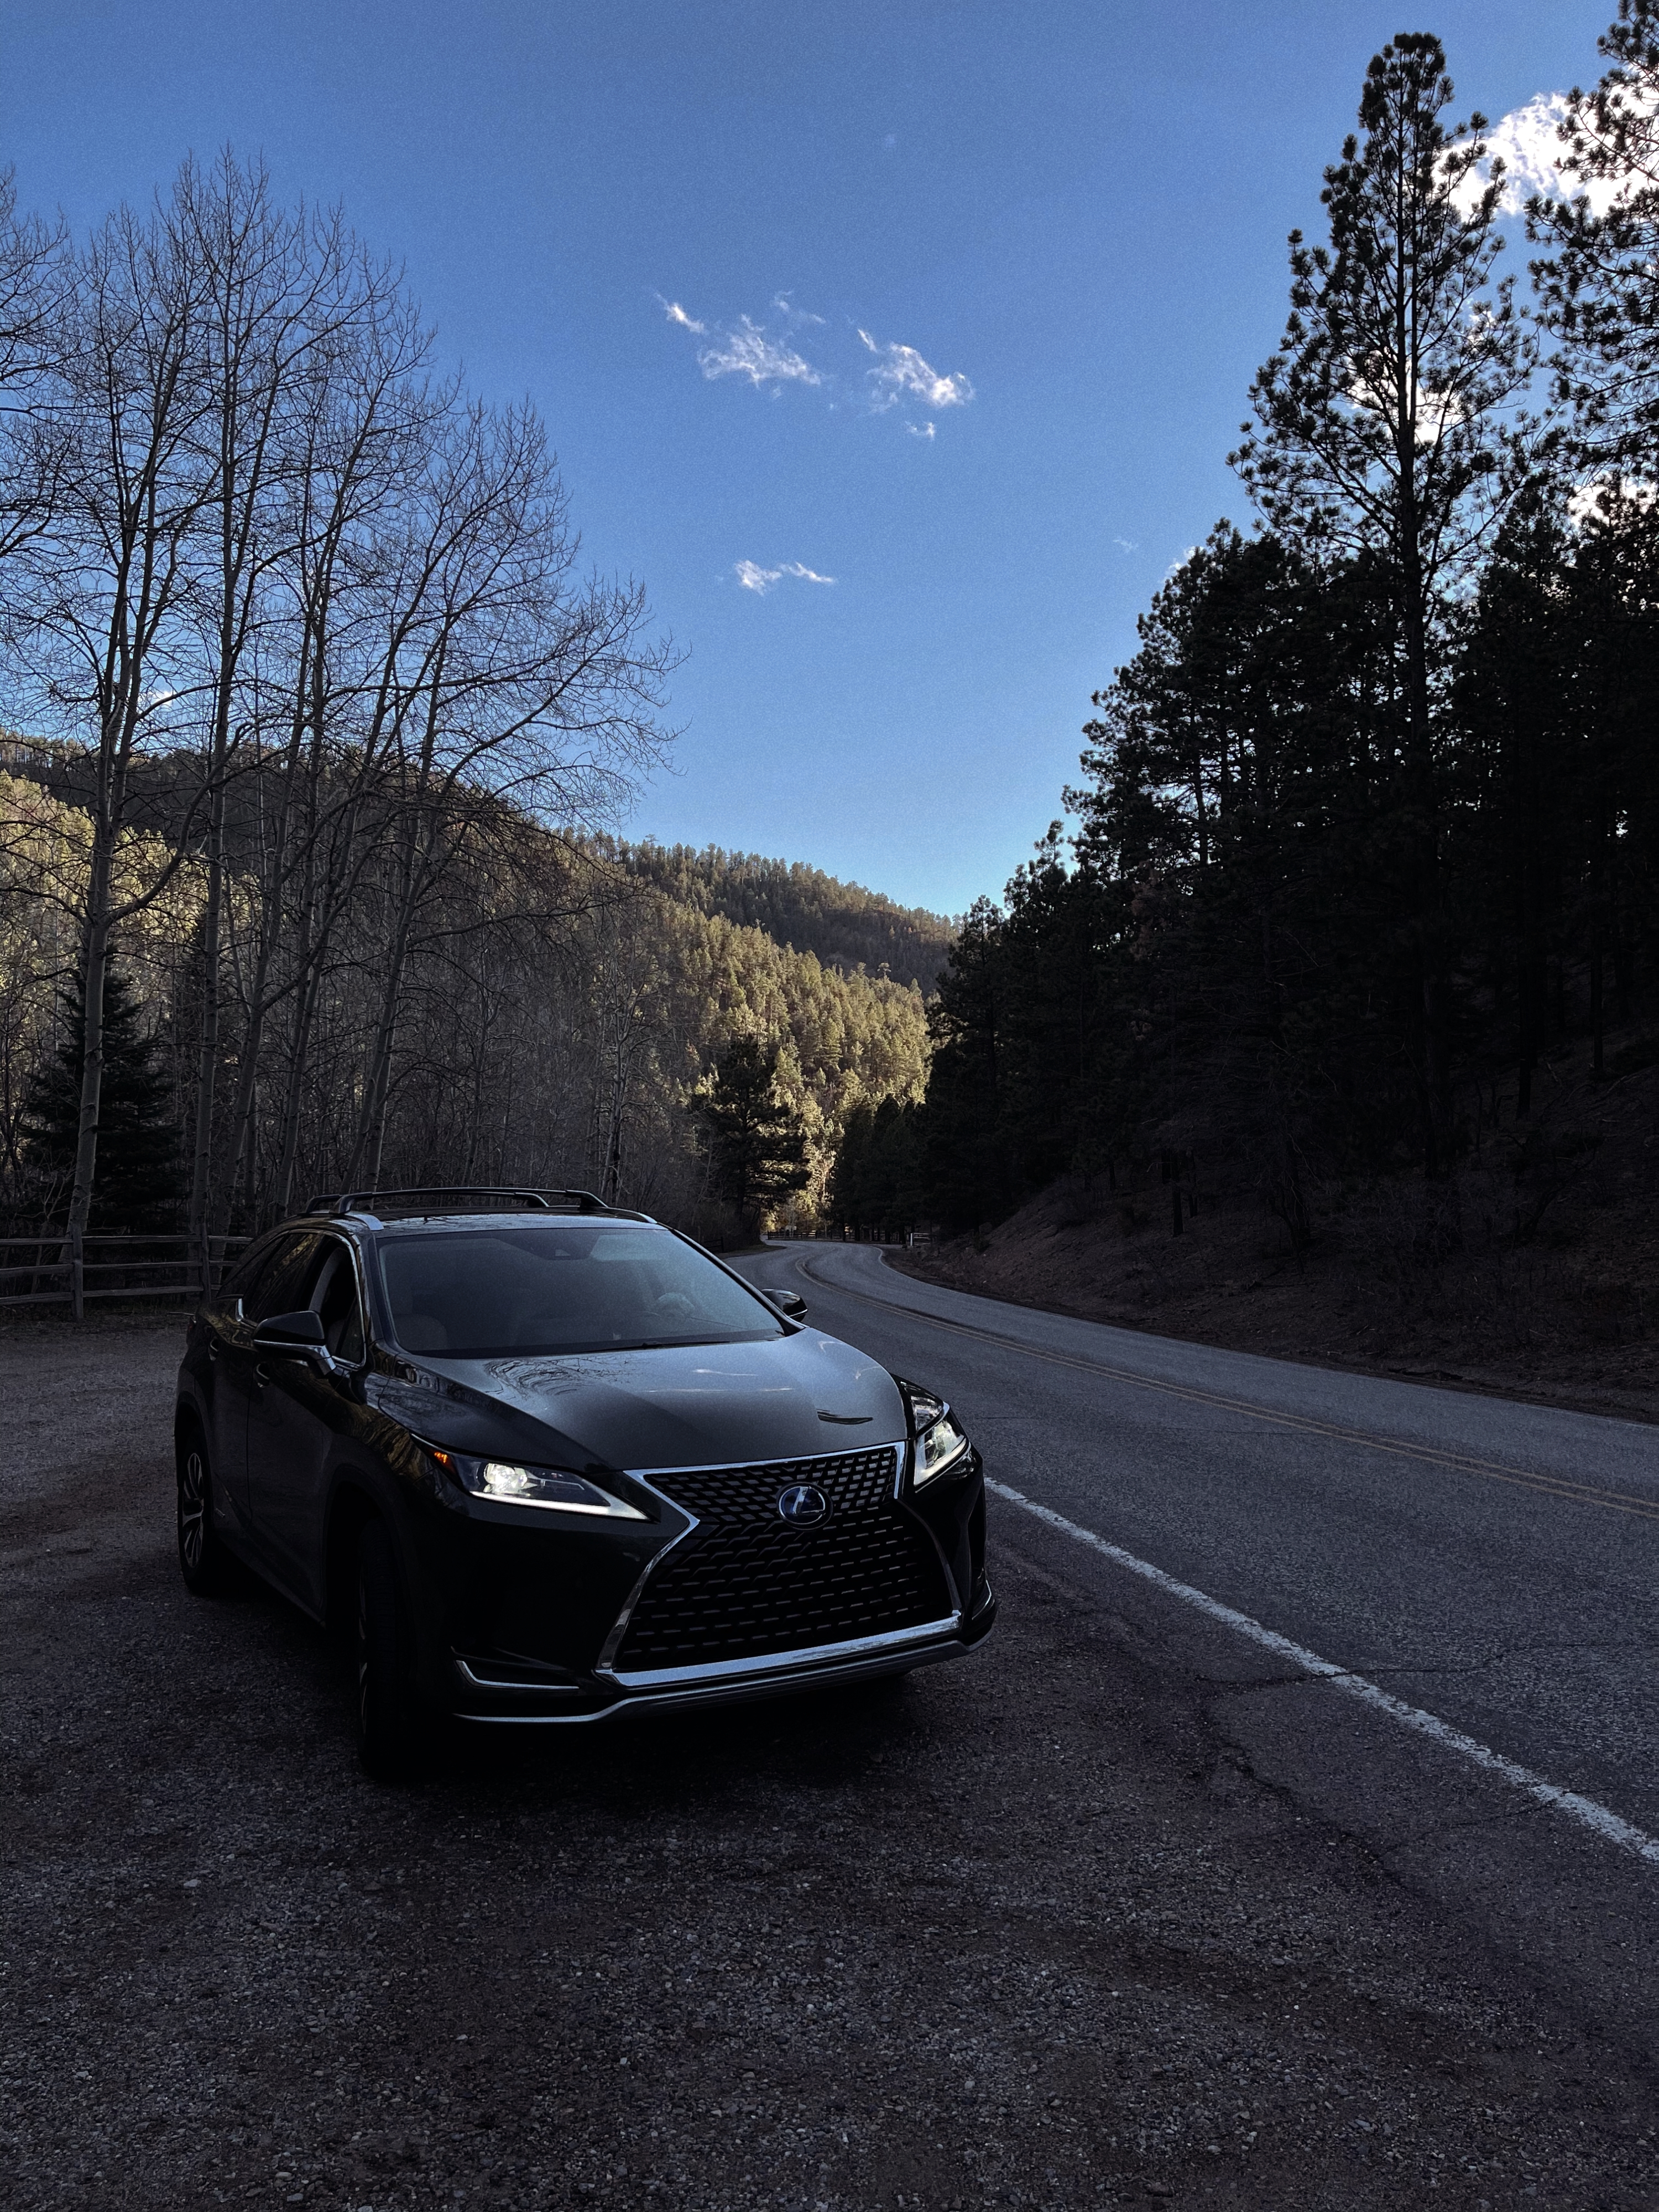 Santa Fe Roadtrip with Lexus | by The Luxi Look